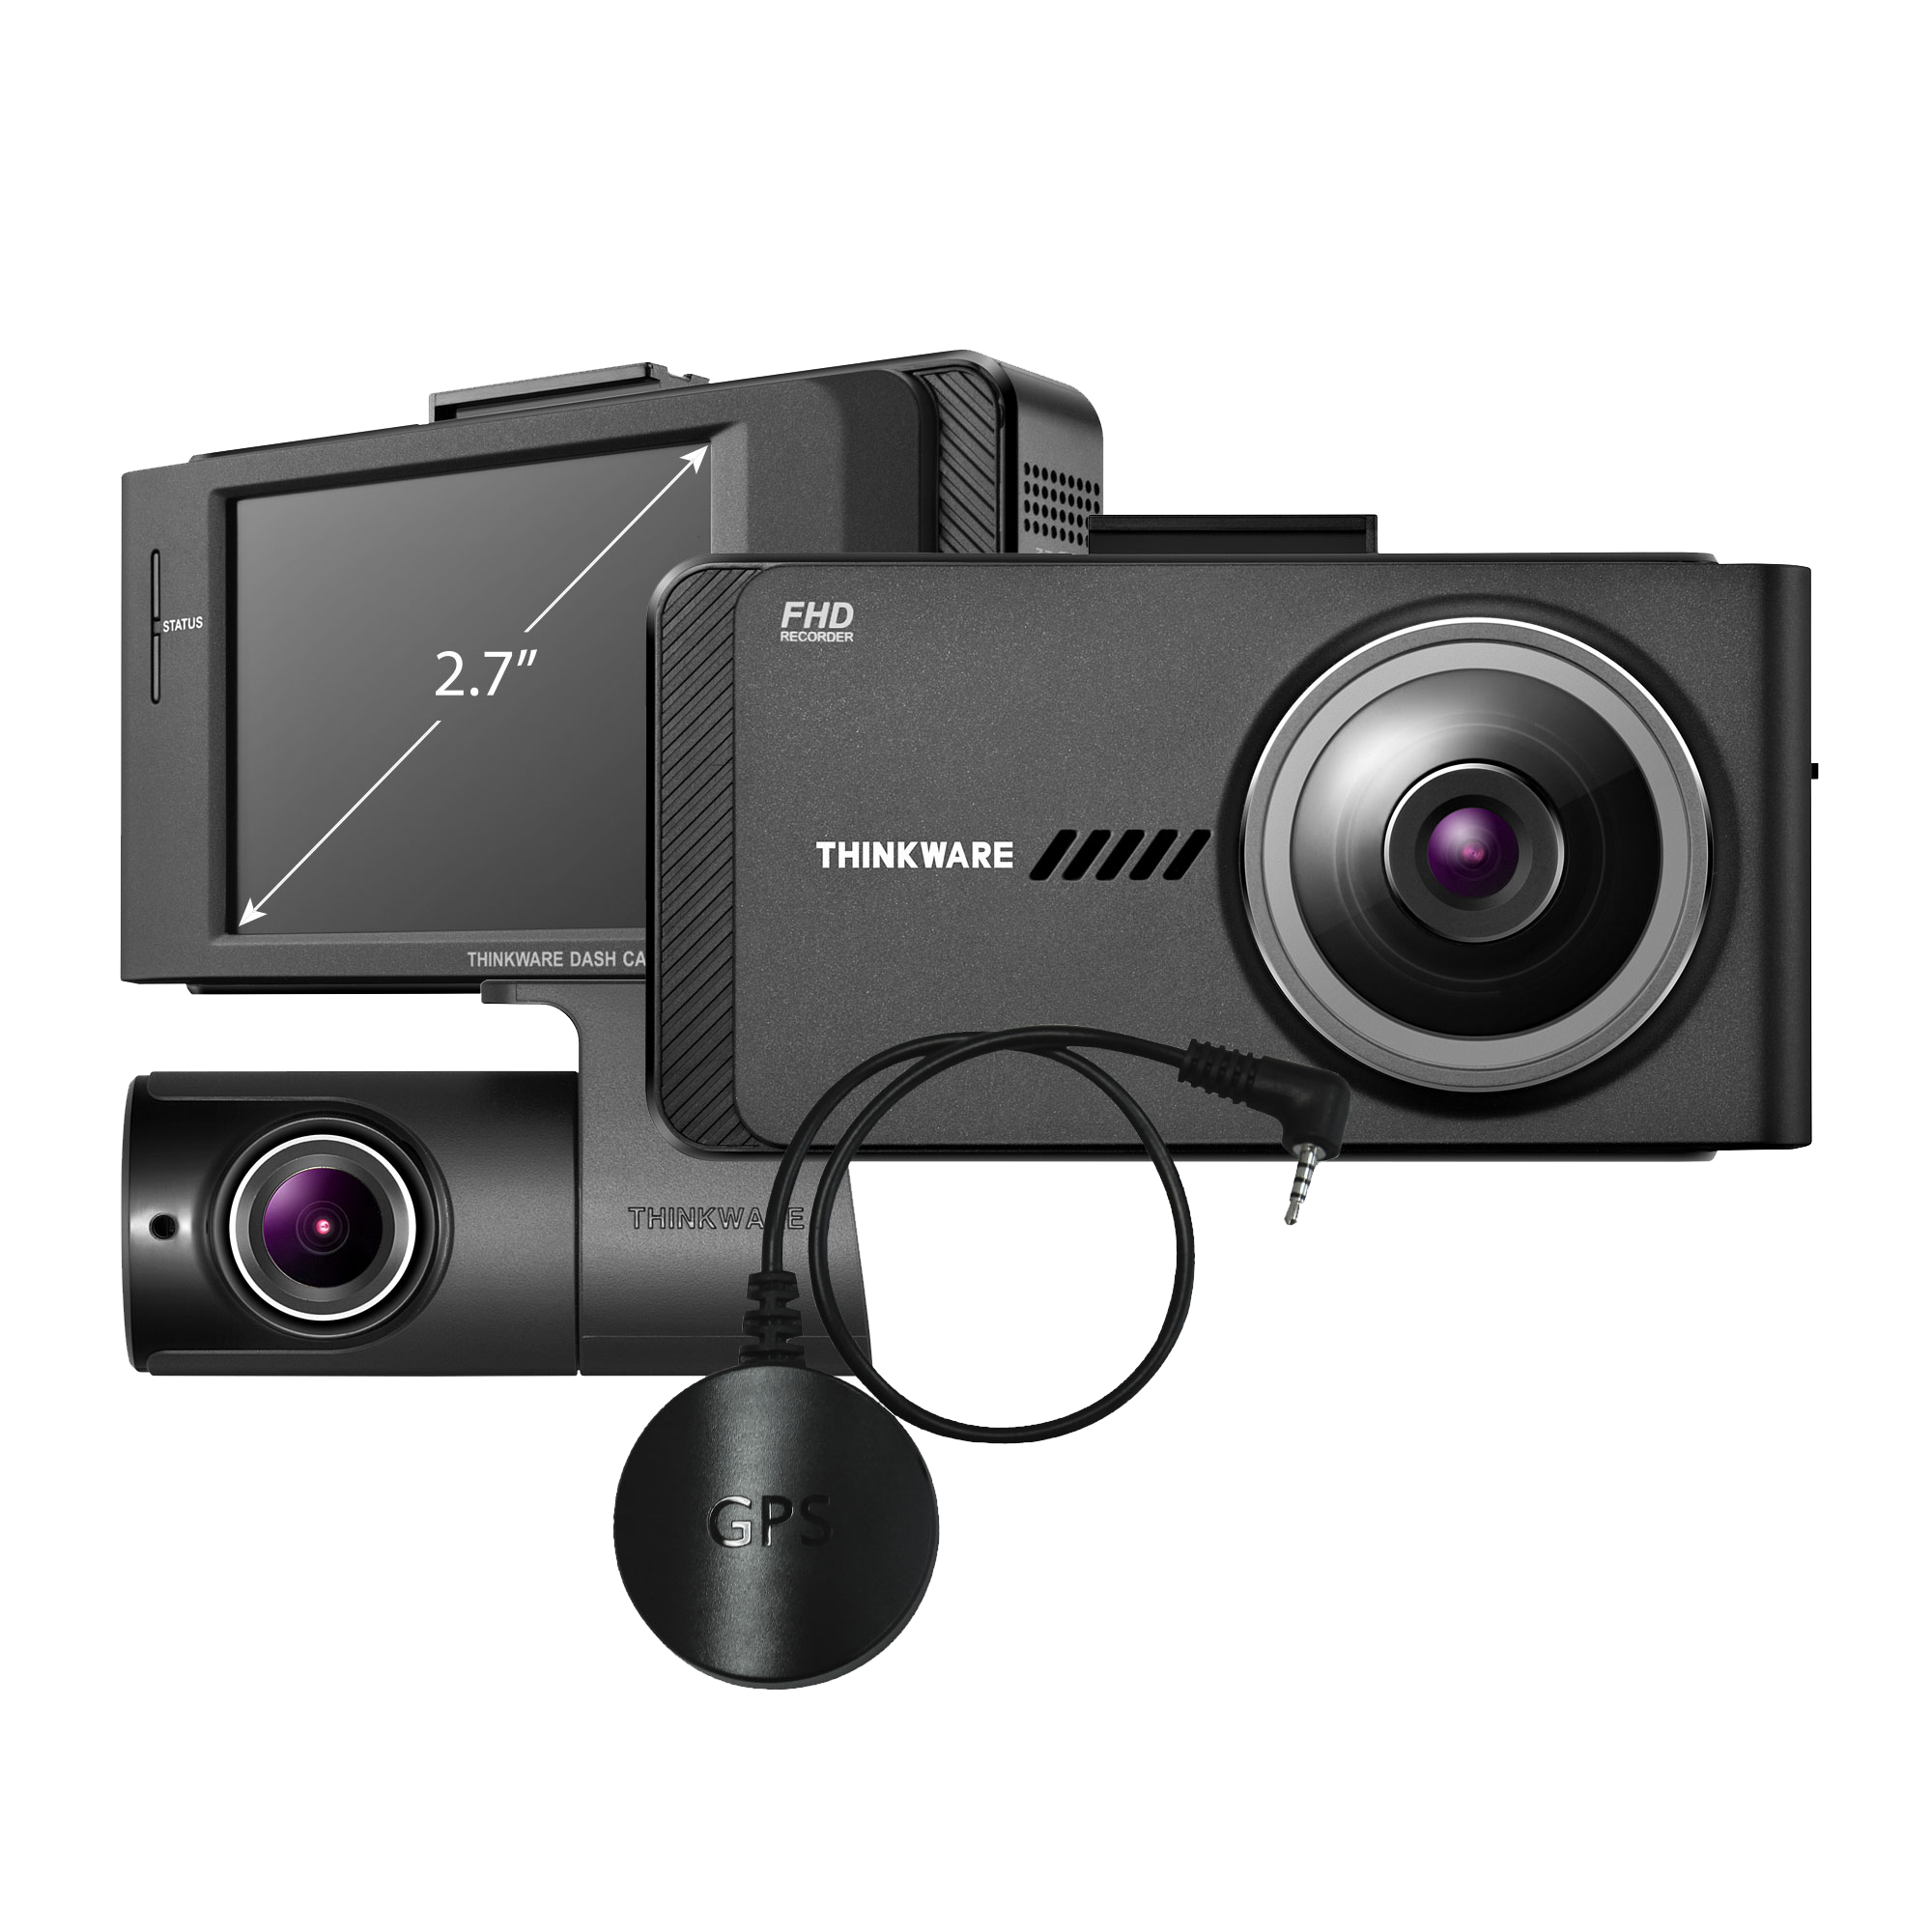 THINKWARE X700 Dual Dash Cam Front and Rear Camera for Cars, 1080P FHD, Dashboard Camera Recorder with G-Sensor, Car Camera W/Sony Sensor, GPS, Night Vision, 16GB, Optional Parking Mode - image 1 of 7